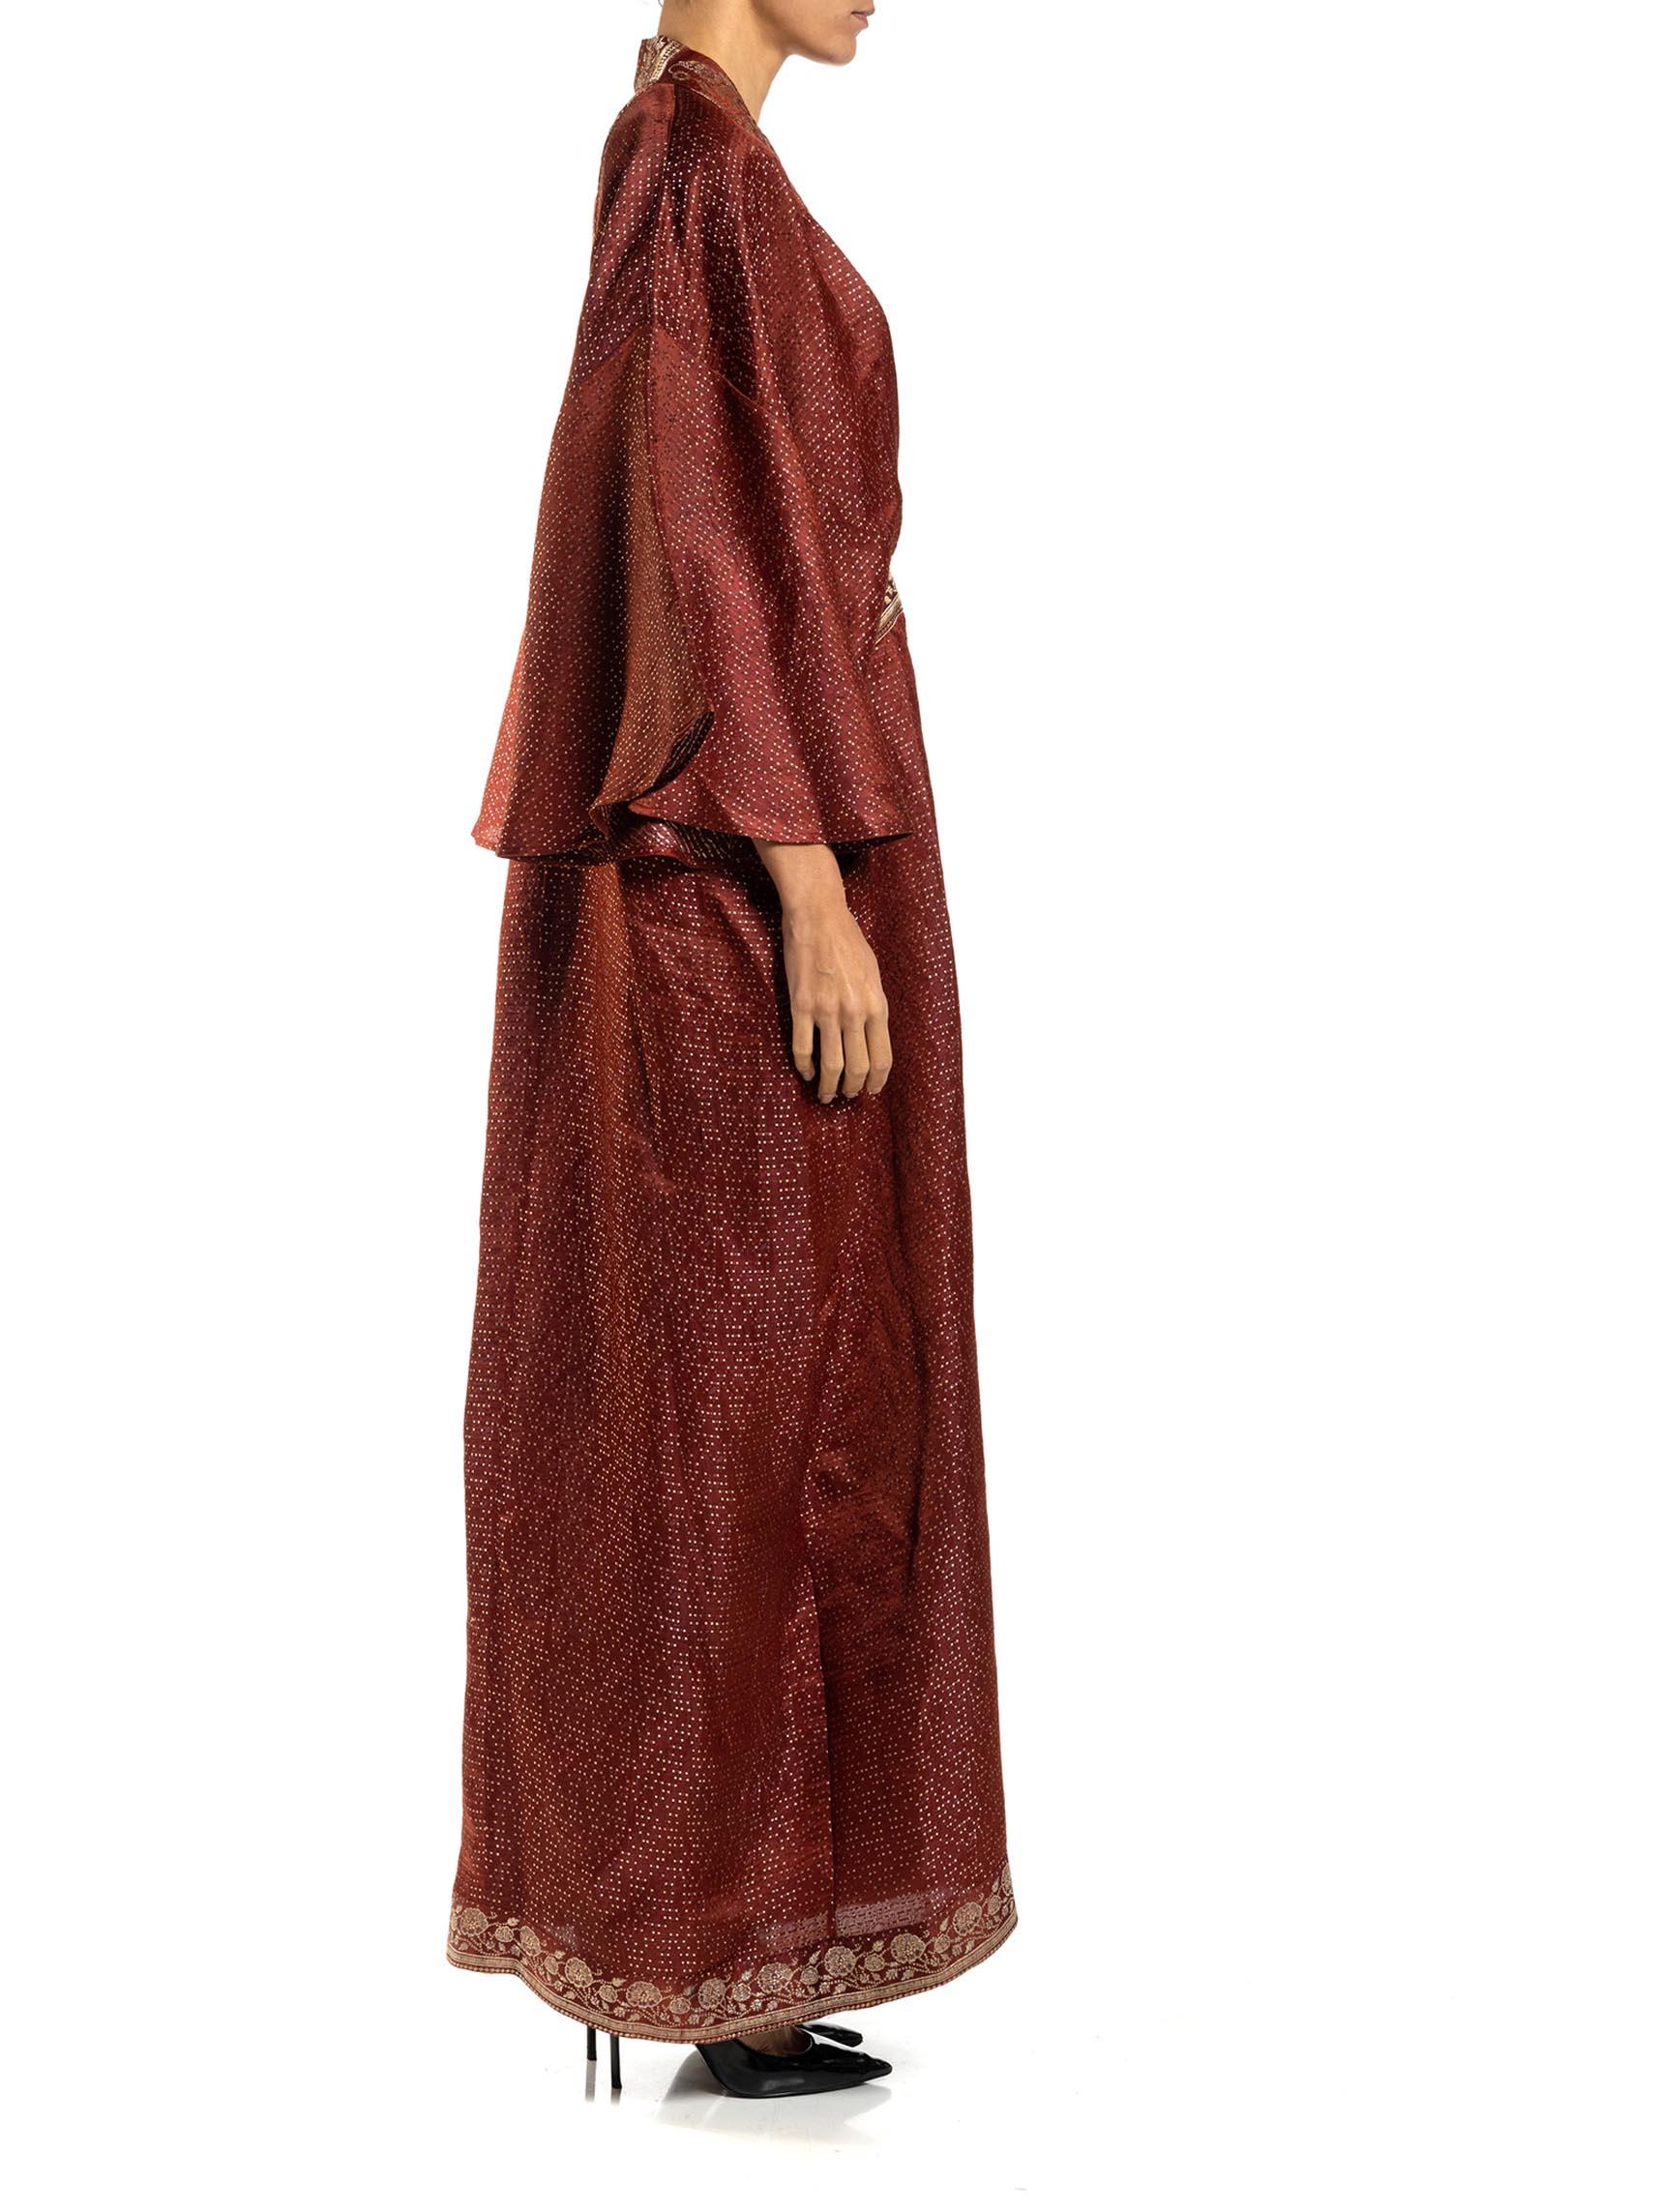 Women's MORPHEW COLLECTION Burgundy Floral Silk Checkered Kaftan Made From Vintage Sari For Sale